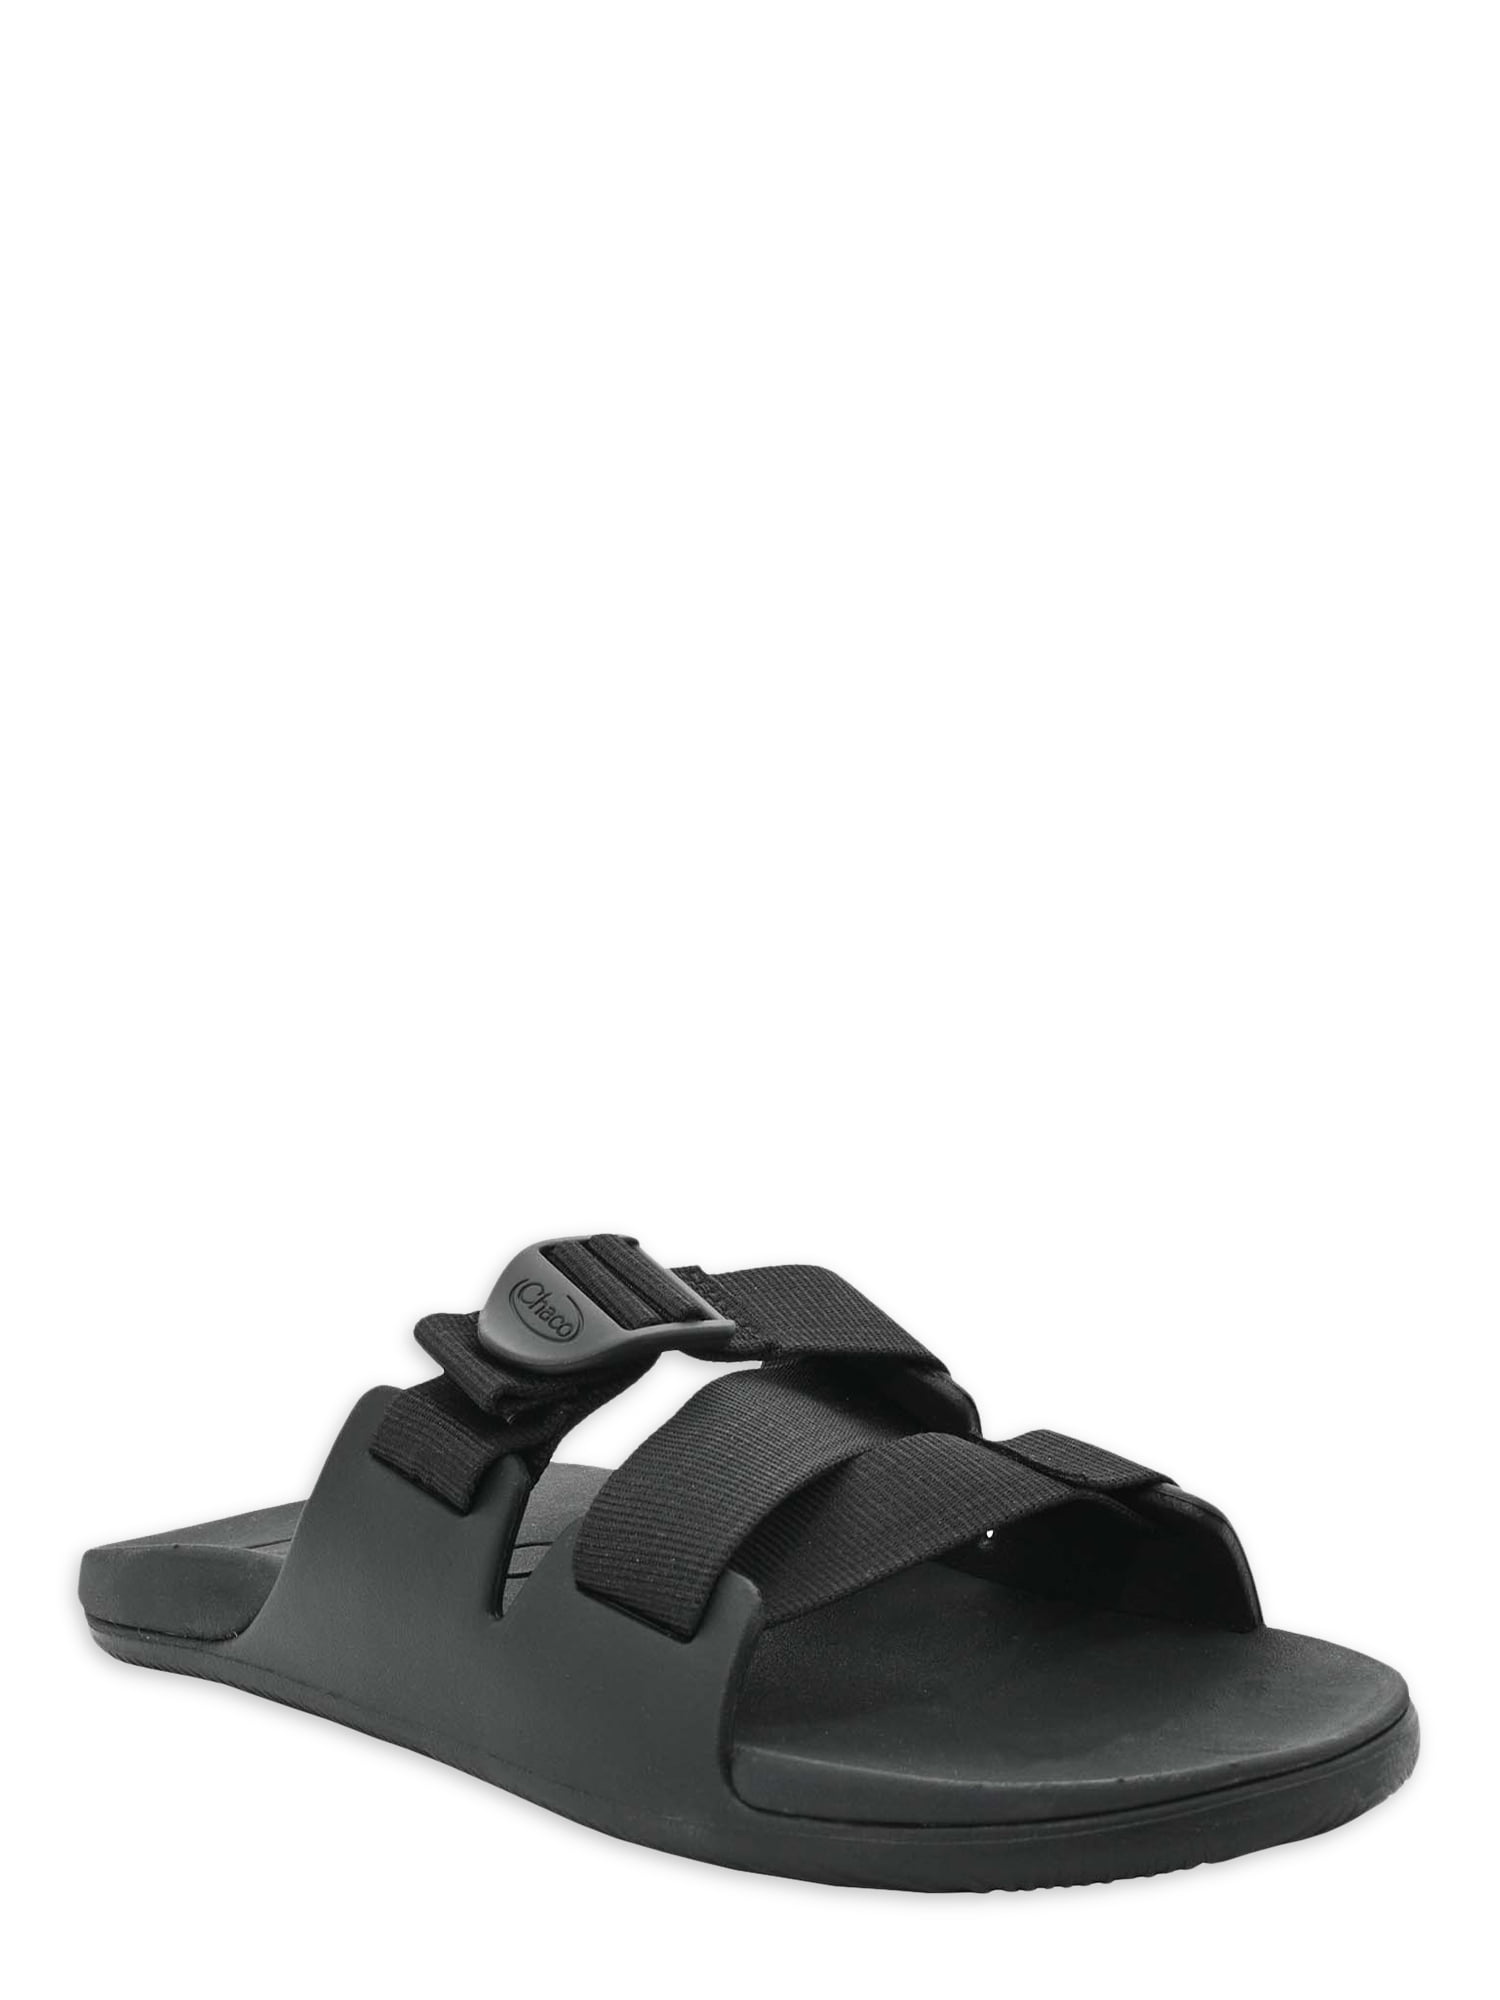 White Mens Shoes Sandals Givenchy Synthetic Marshmallow Sandals in Black slides and flip flops Leather sandals for Men 